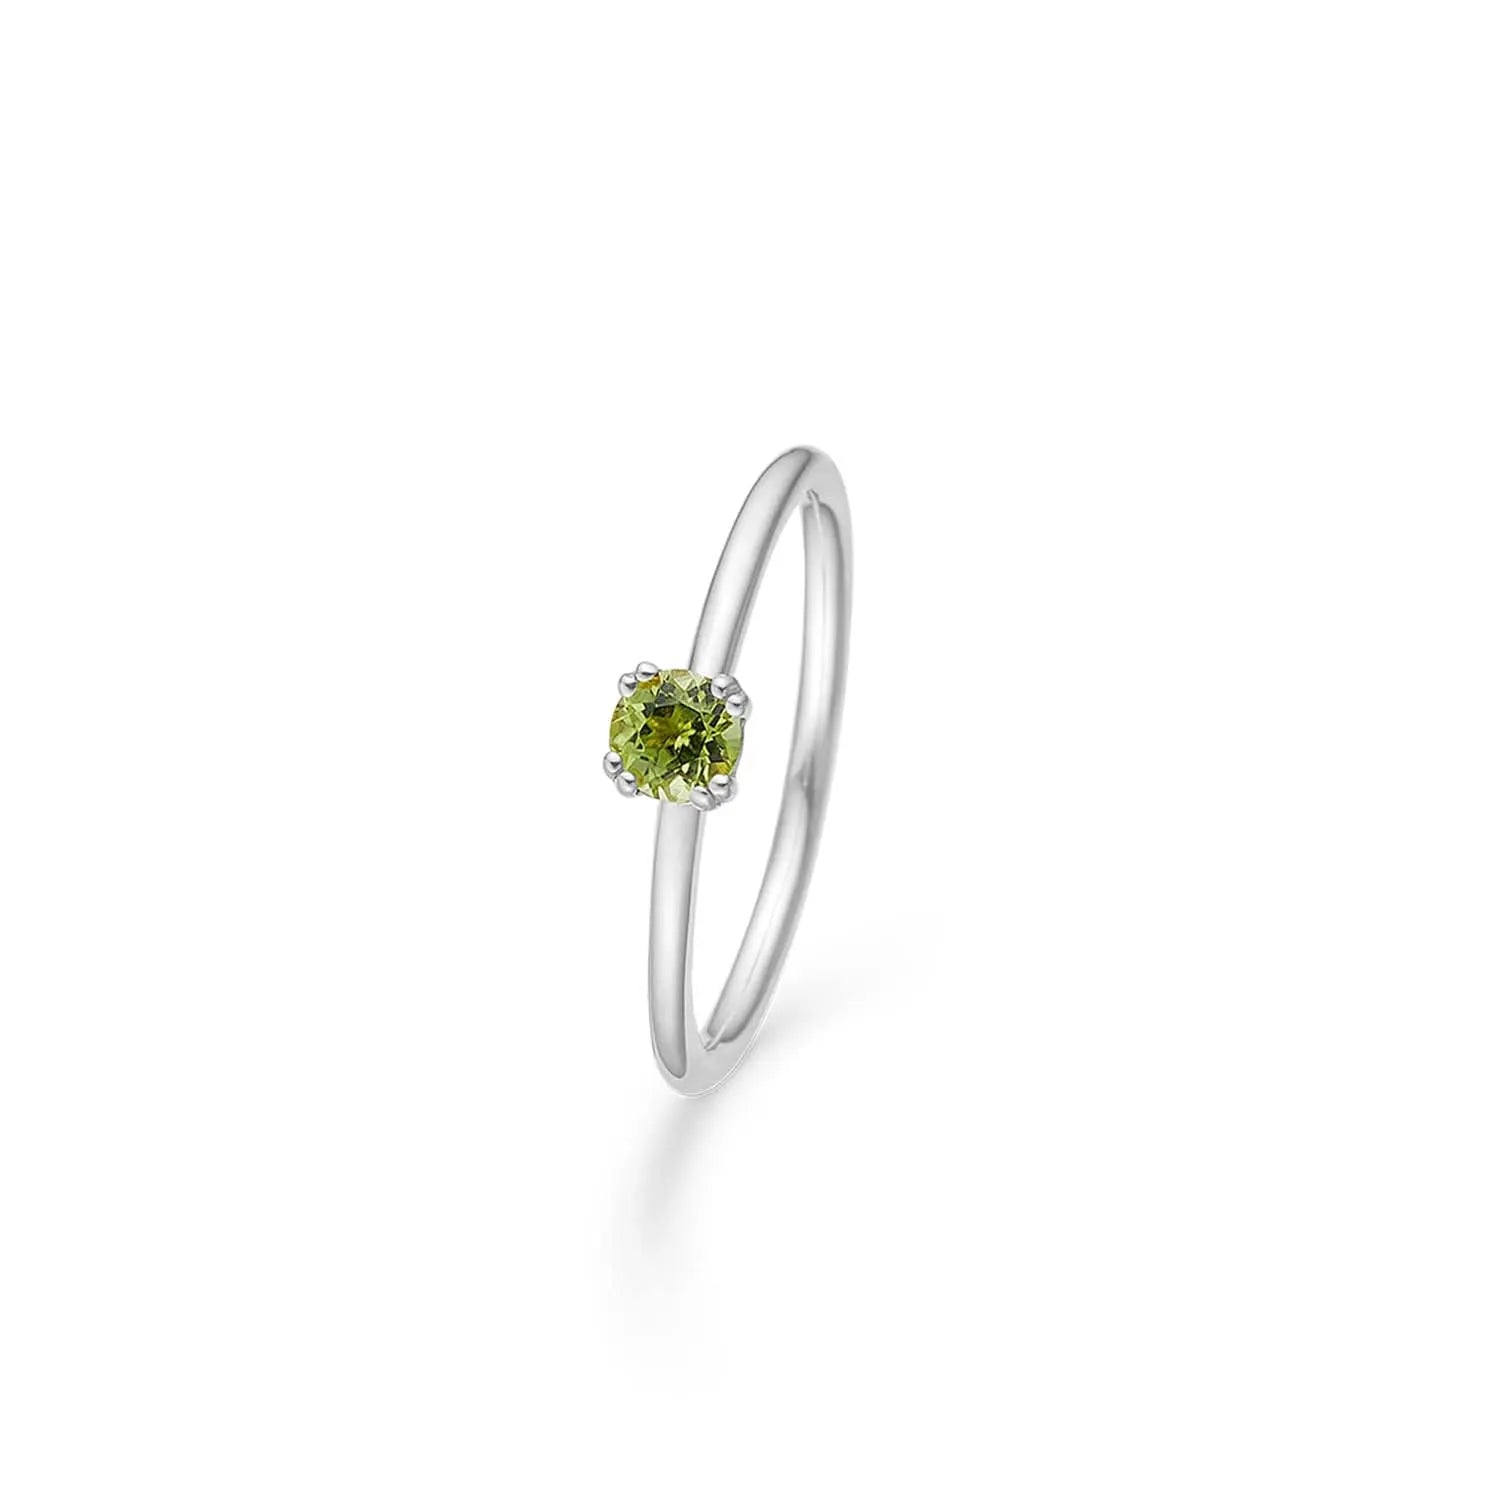 Poetry Solitaire Peridot Ring - Sølv fra Mads Z Silver Label